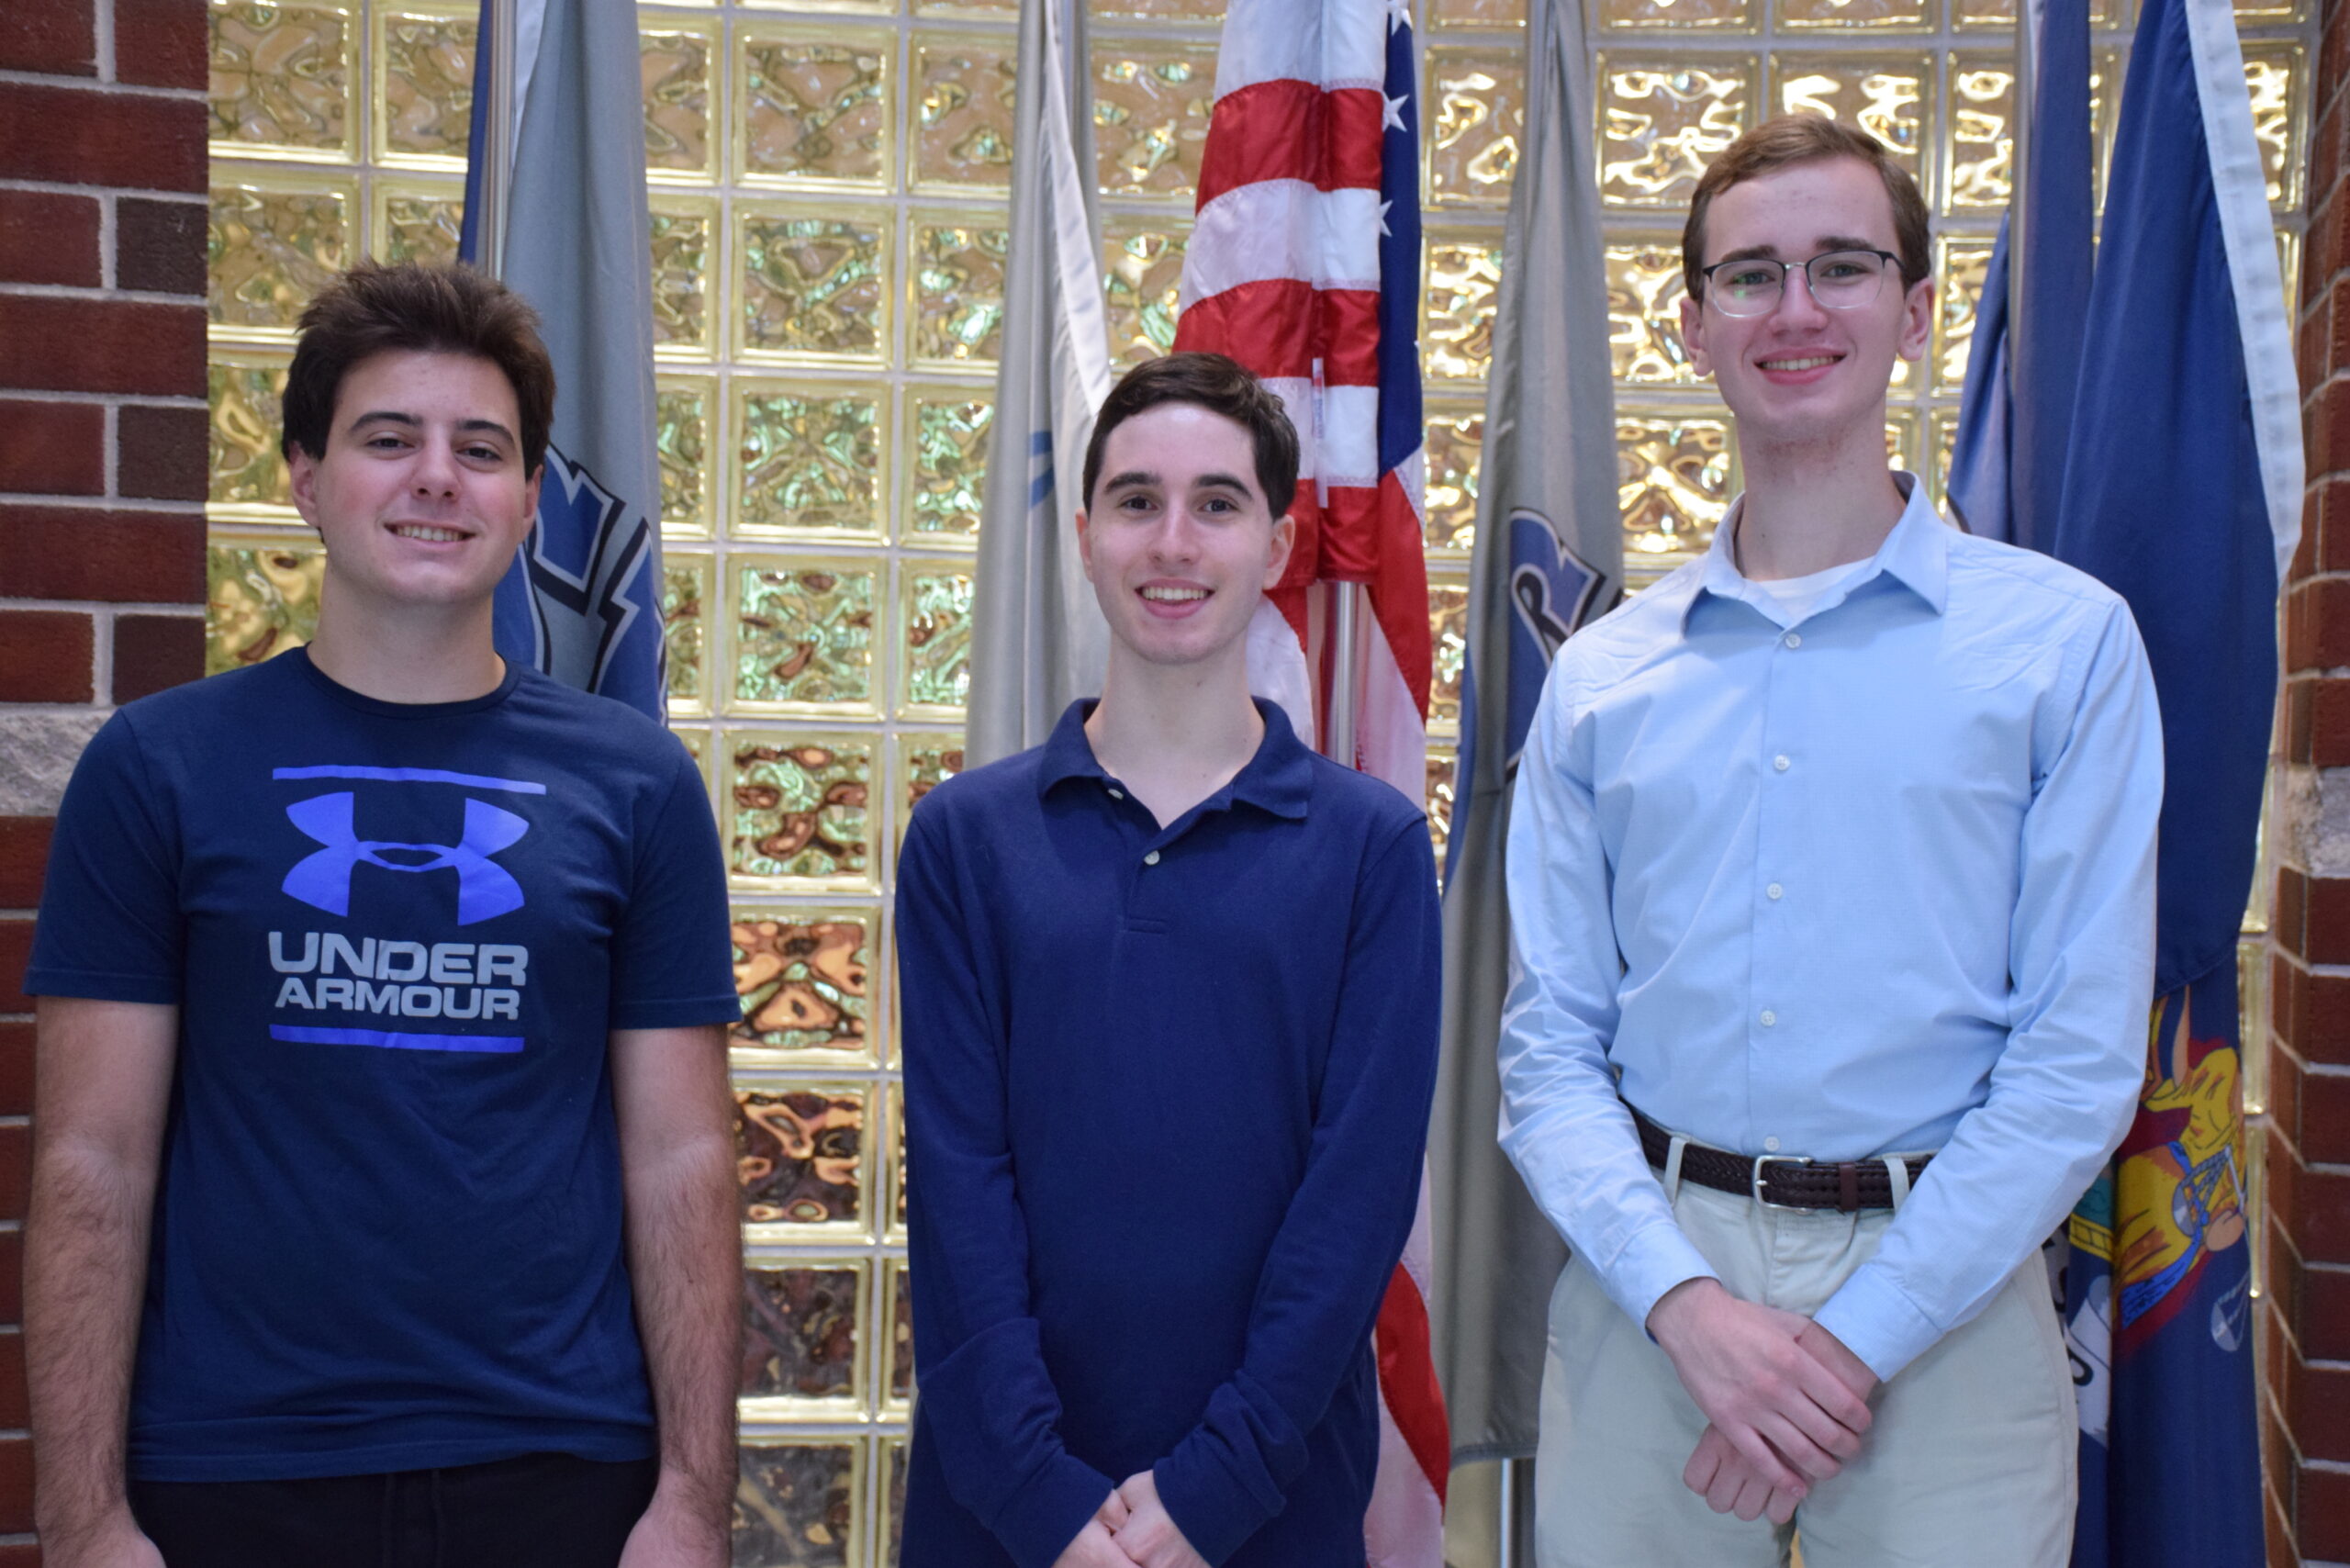 Eastport-South Manor Junior-Senior High School student-musicians, from left, Lennon Lotardo, Benjamin Isaacson and Aidan Young will attend the NAfME All-National Honors Festival in Baltimore in November. COURTESTY EASTPORT-SOUTH MANOR SCHOOL DISTRICT